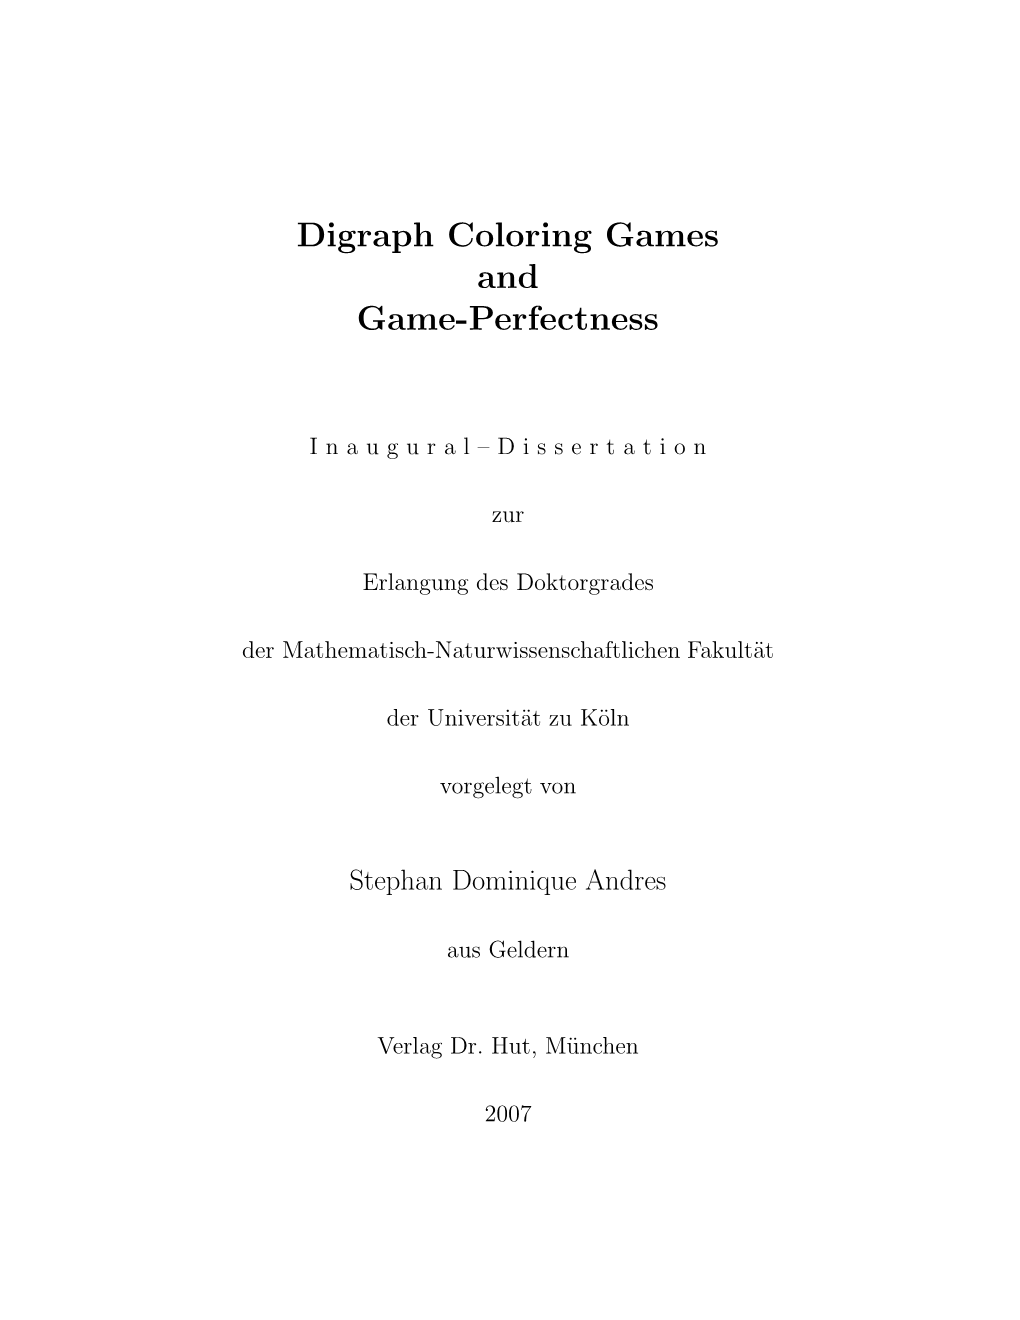 Digraph Coloring Games and Game-Perfectness